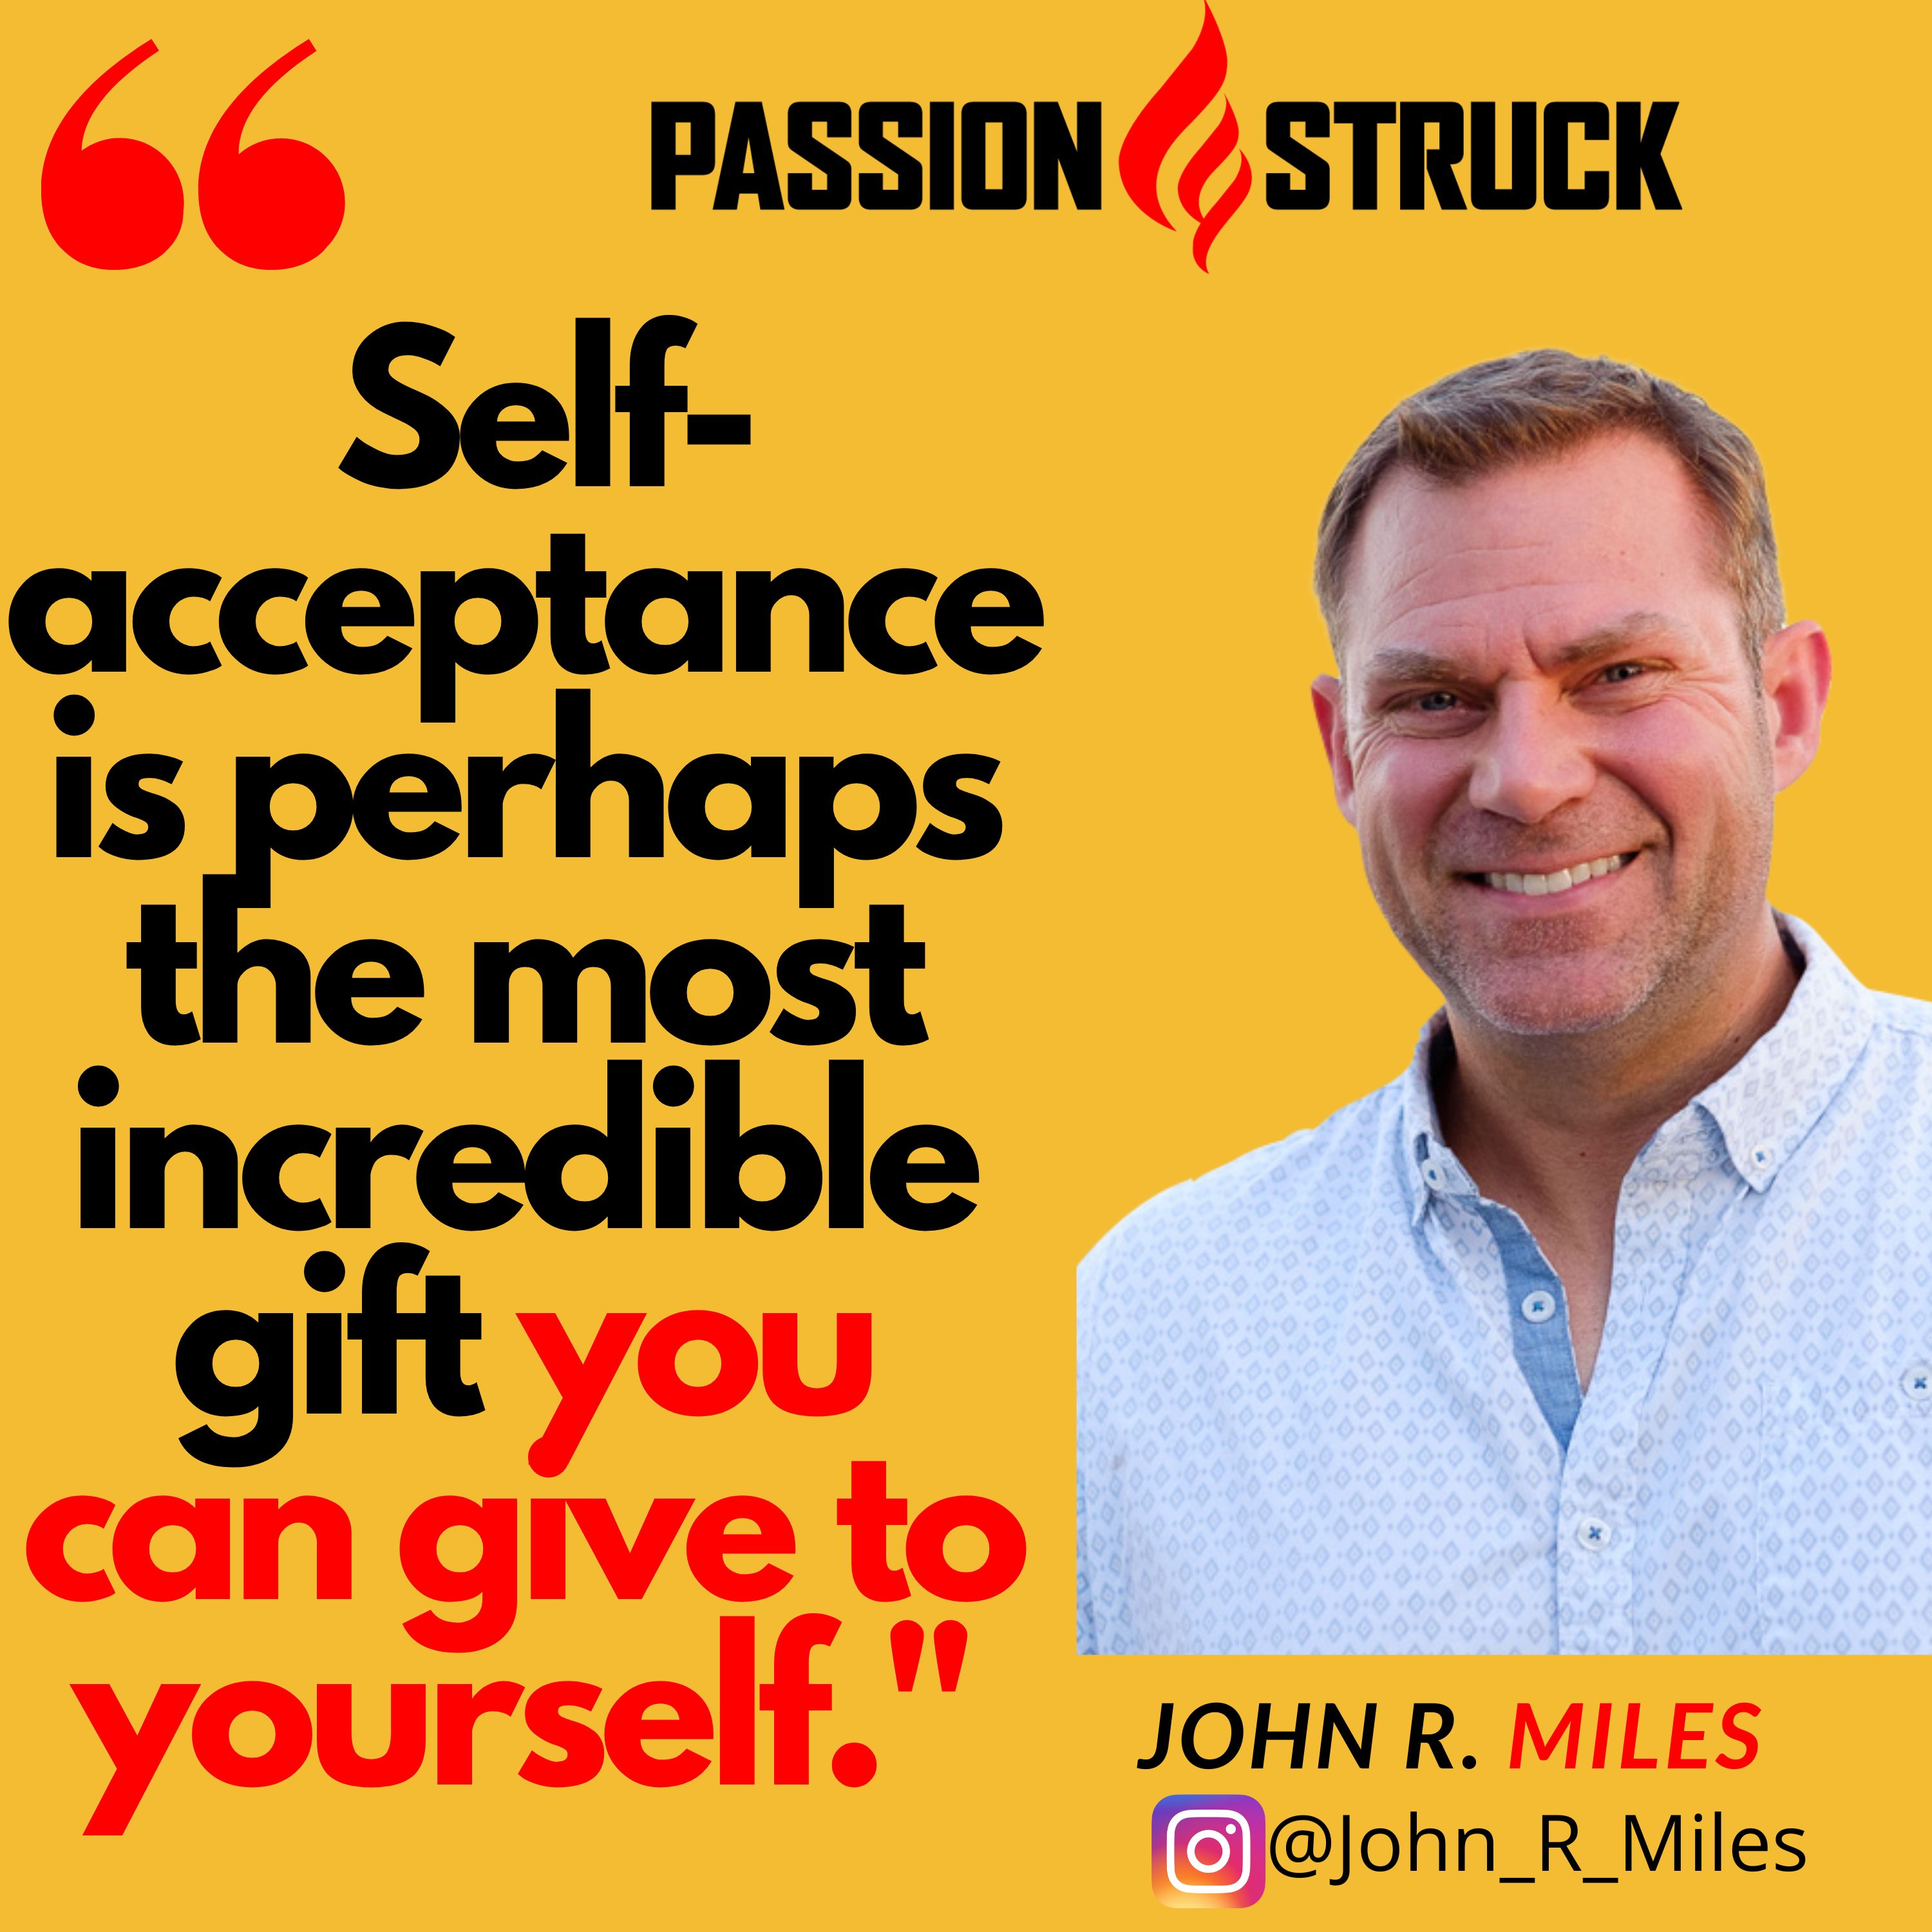 John R. Miles quote "self-acceptance is perhaps the most incredible gift you can give yourself"